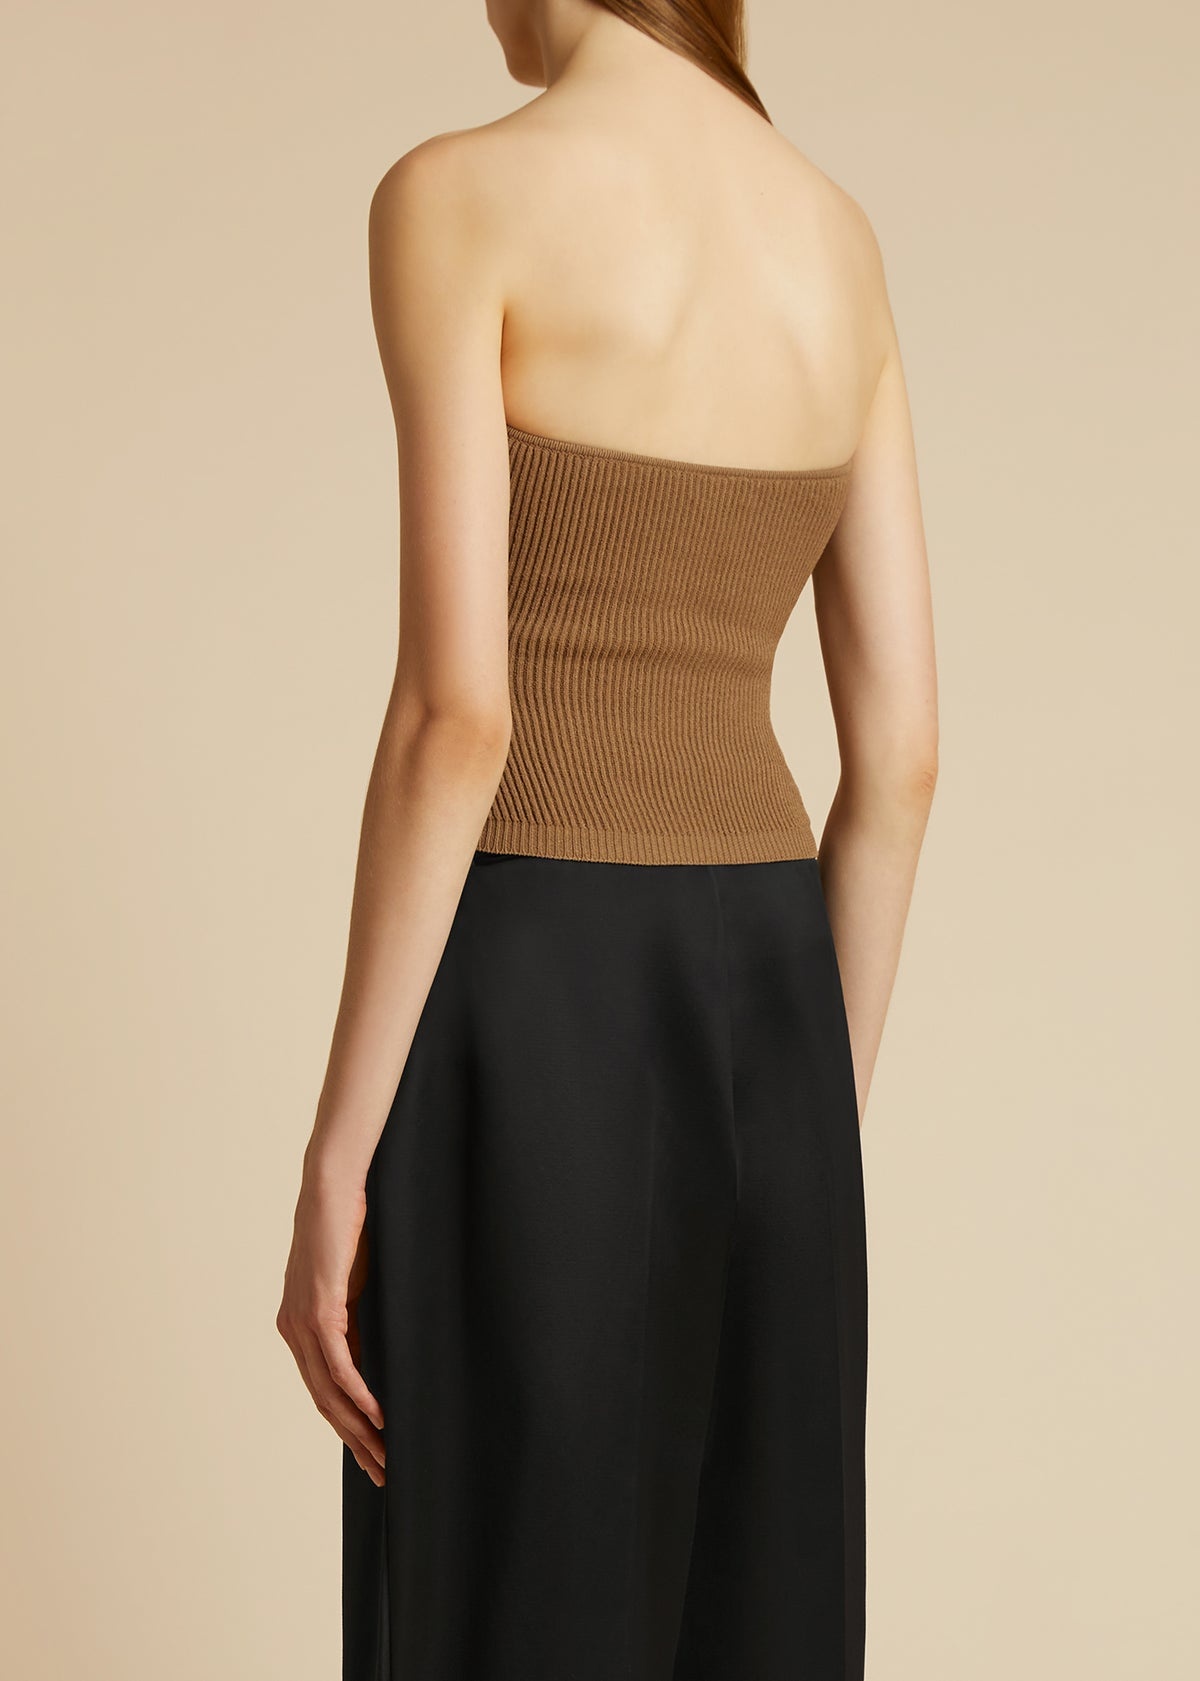 The Jericho Top in Carob - 3